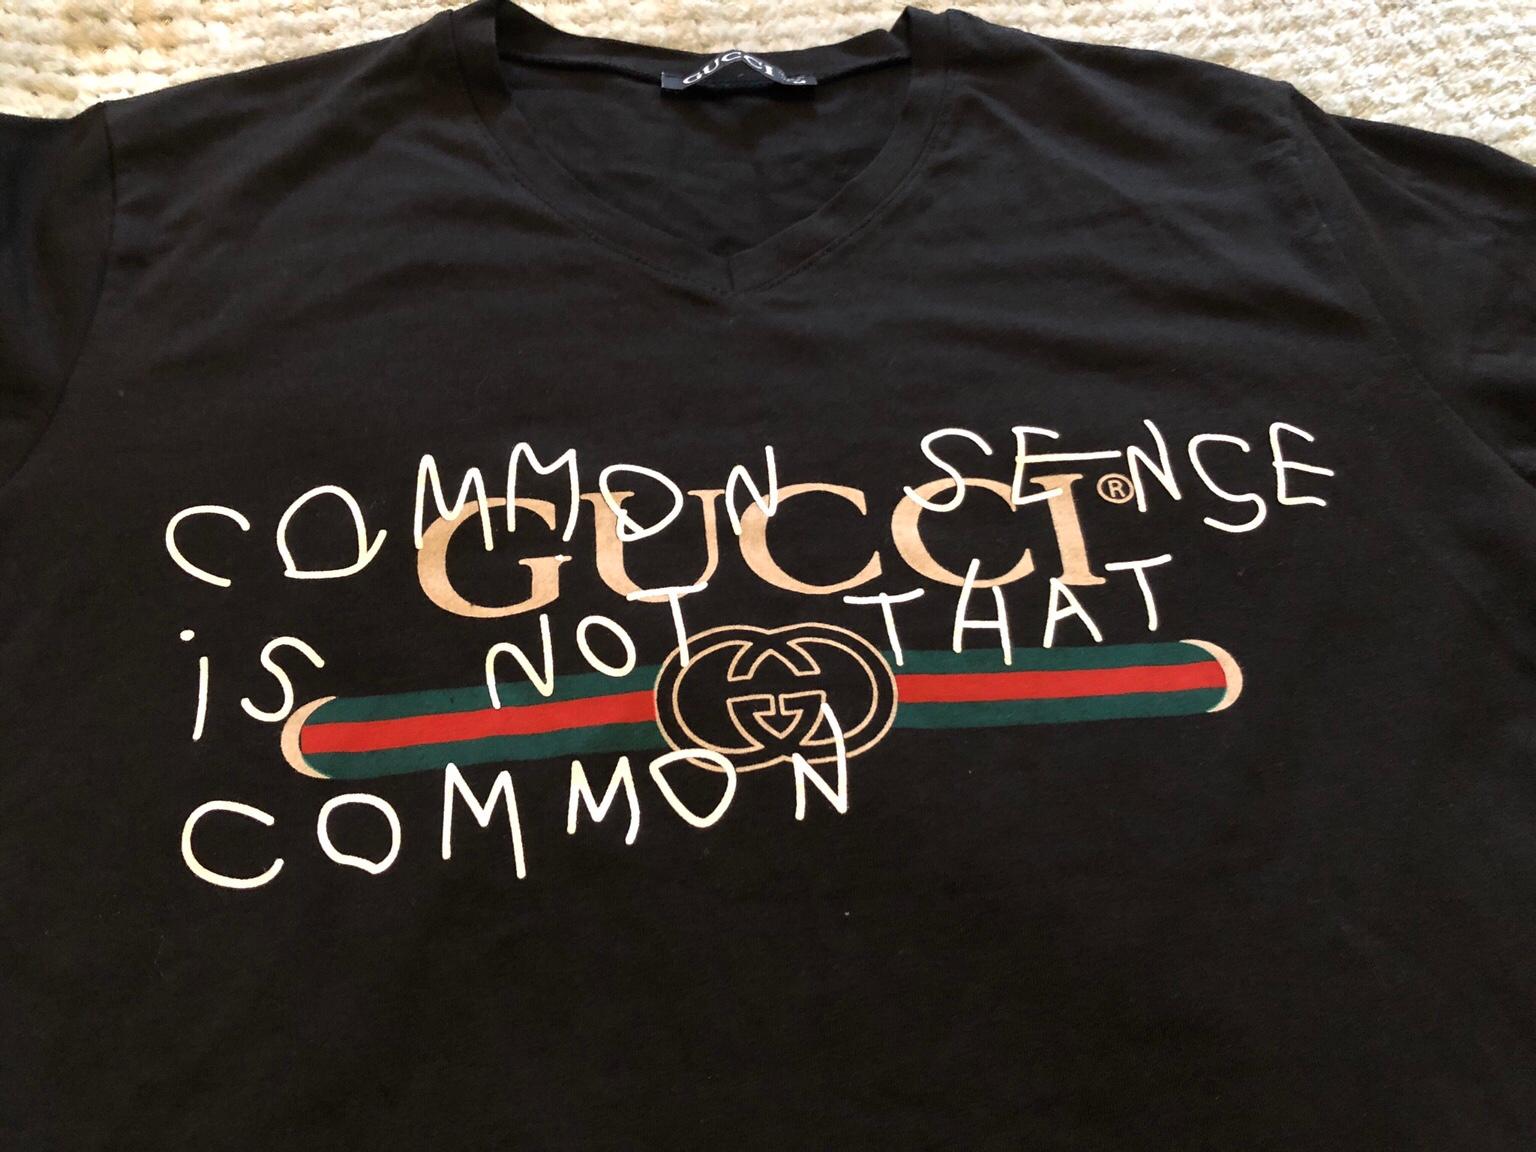 gucci common sense is not that common tee